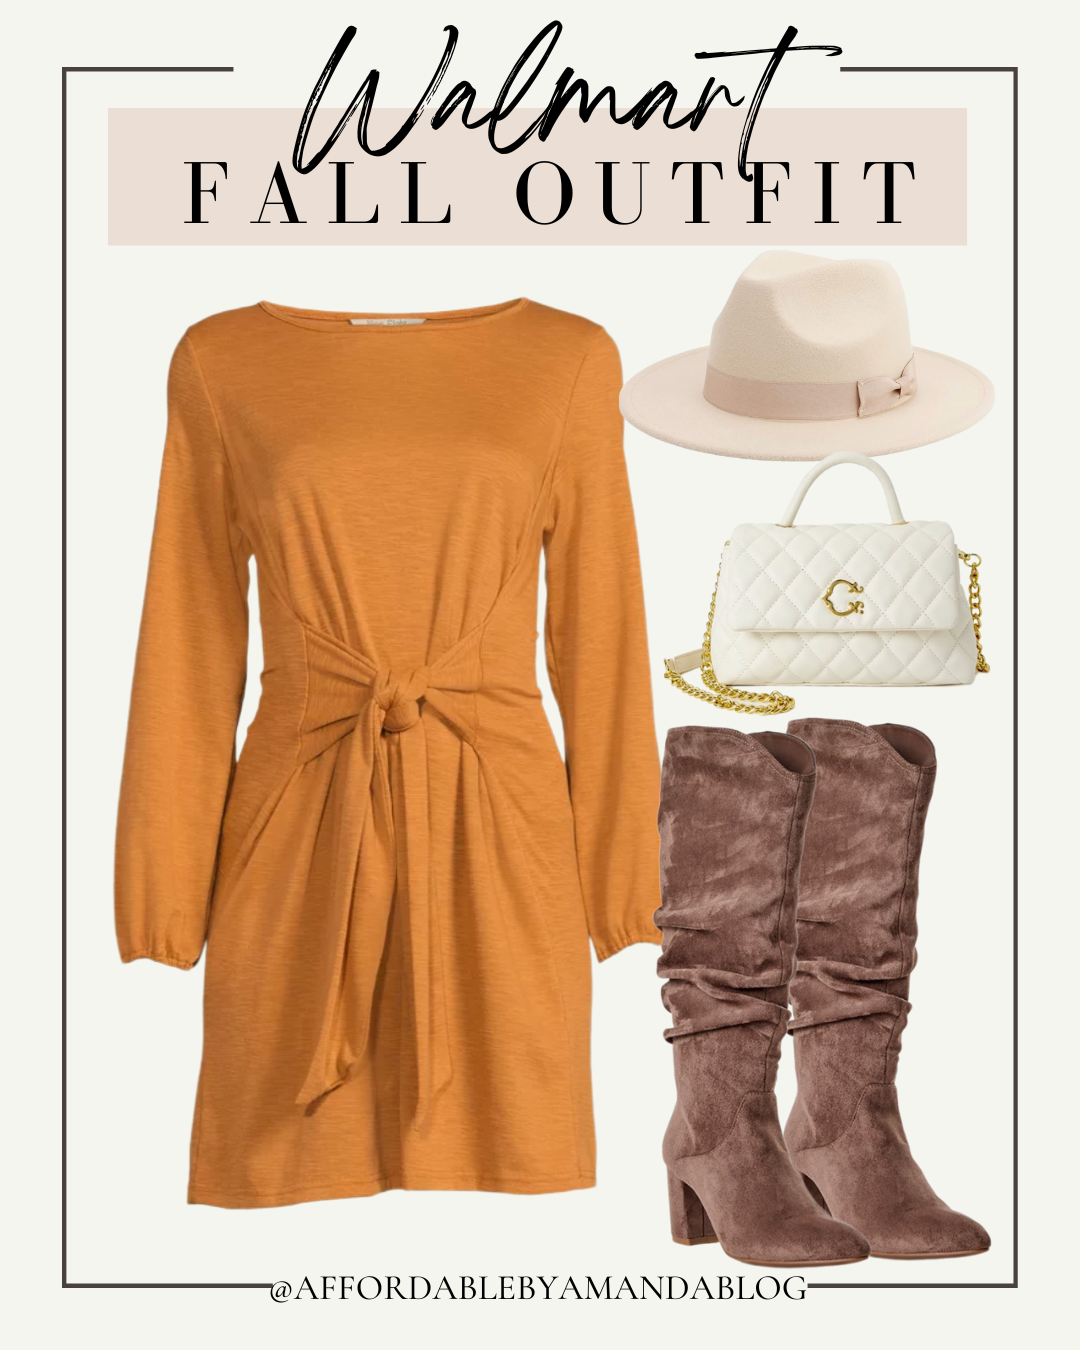 Cute Fall New Arrivals at Walmart - Walmart Fall Fashion Finds 2022 - Fall Outfit Ideas from Walmart on a Budget.